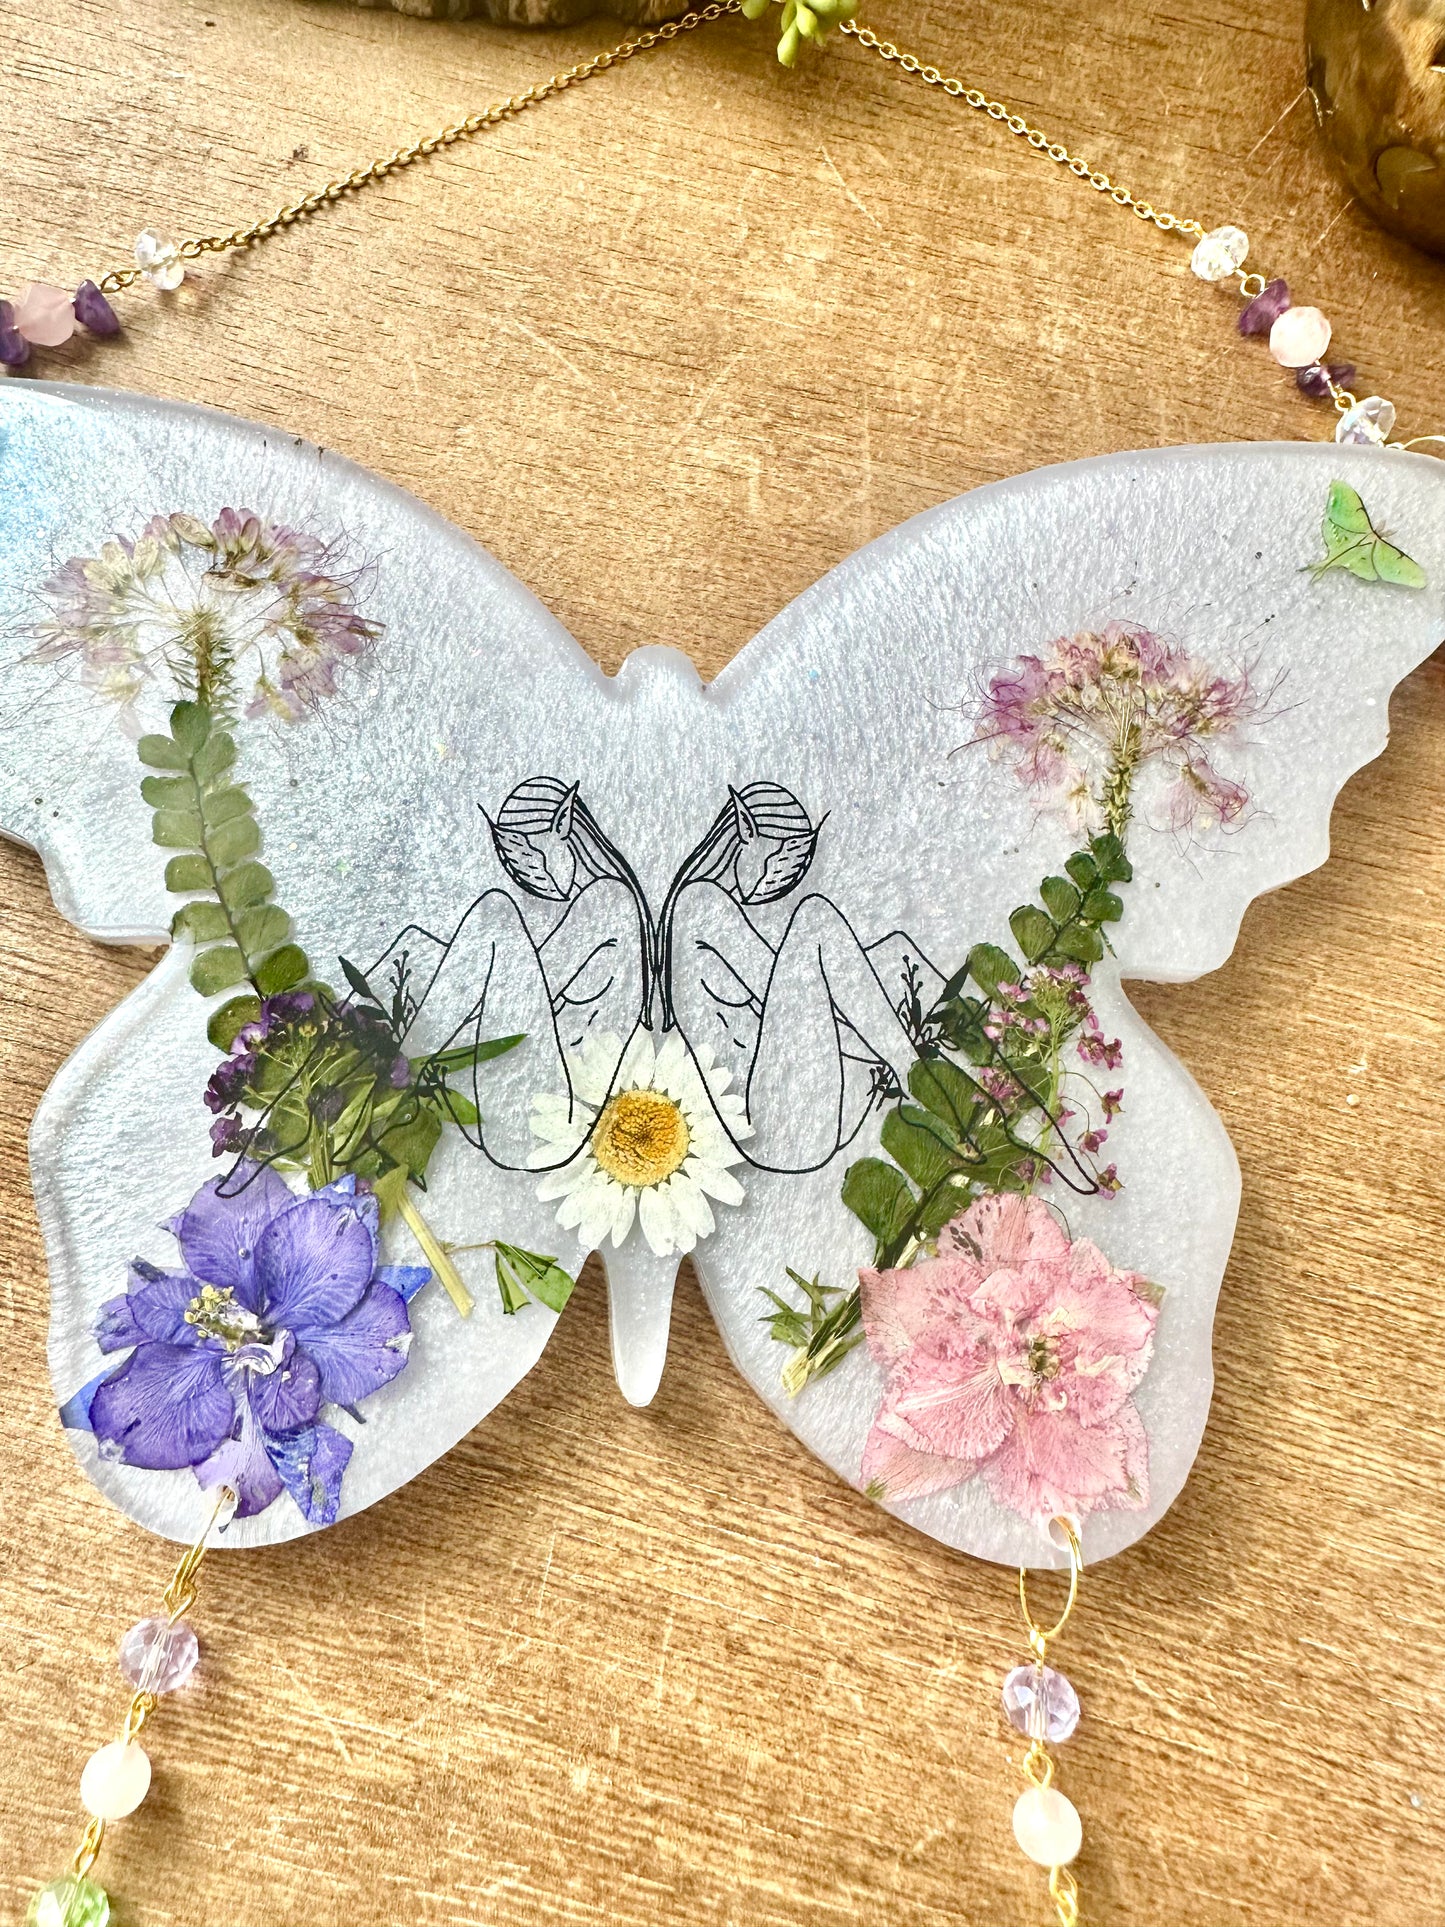 Gemini inspired floral butterfly sun-catcher wall hang